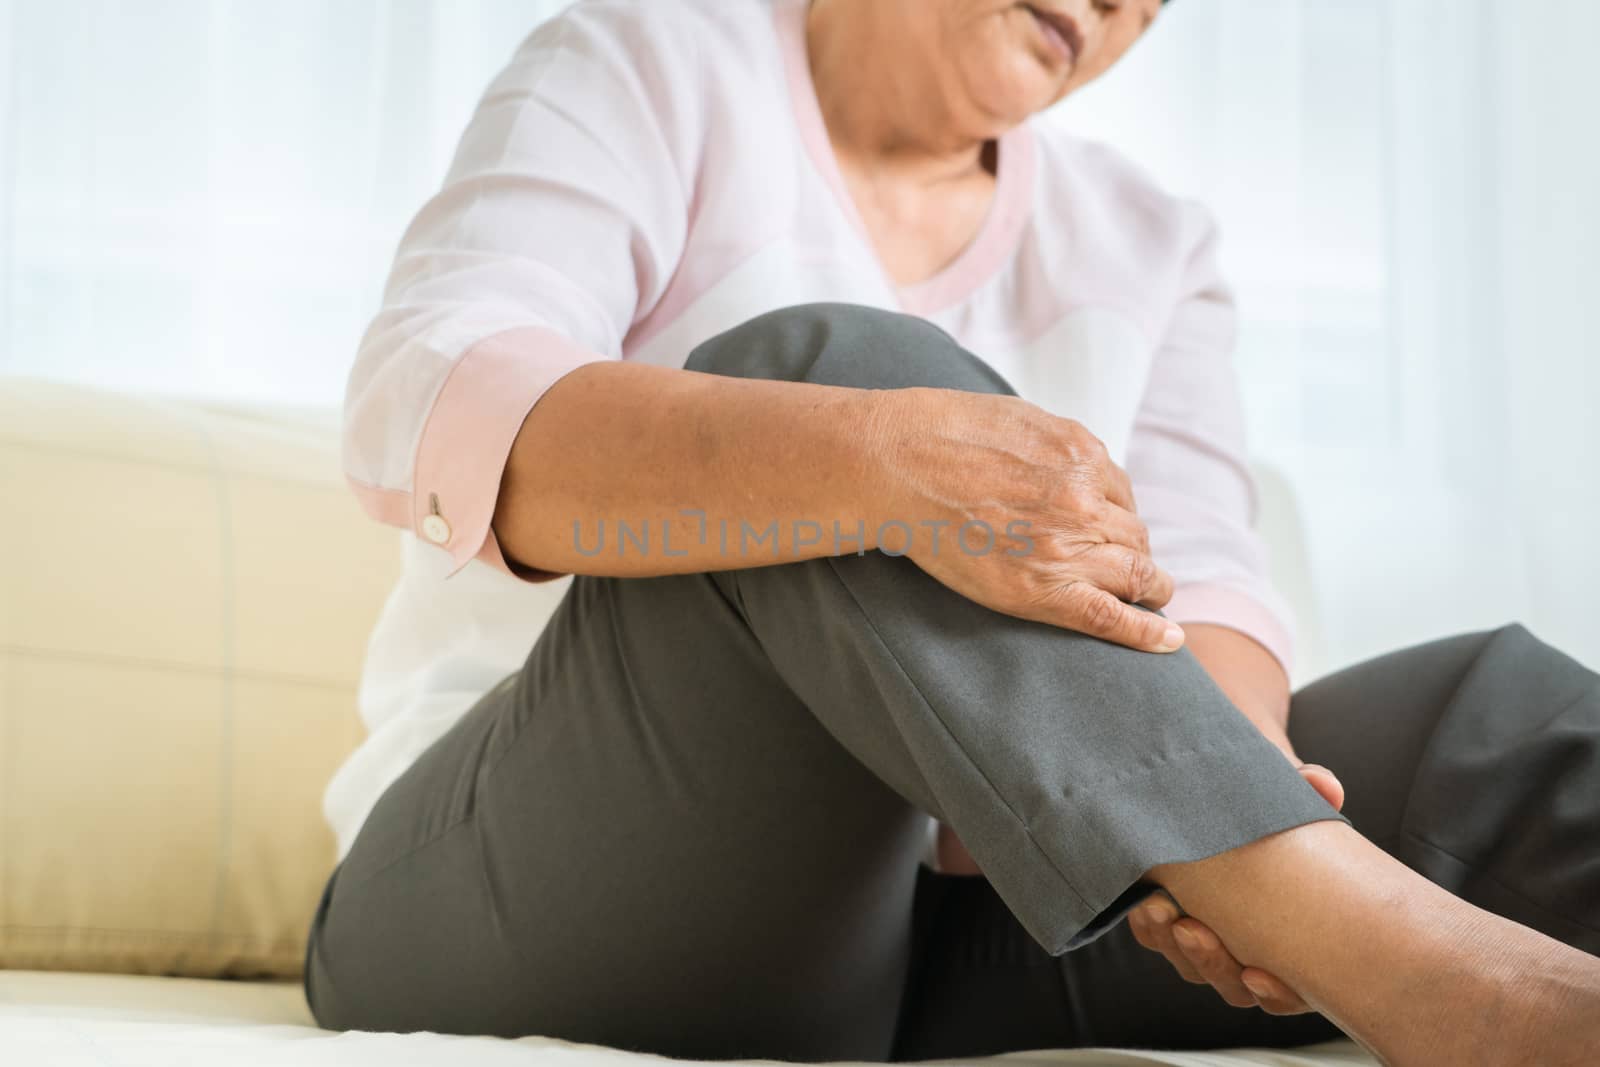 leg pain of senior woman at home, healthcare problem of senior c by psodaz